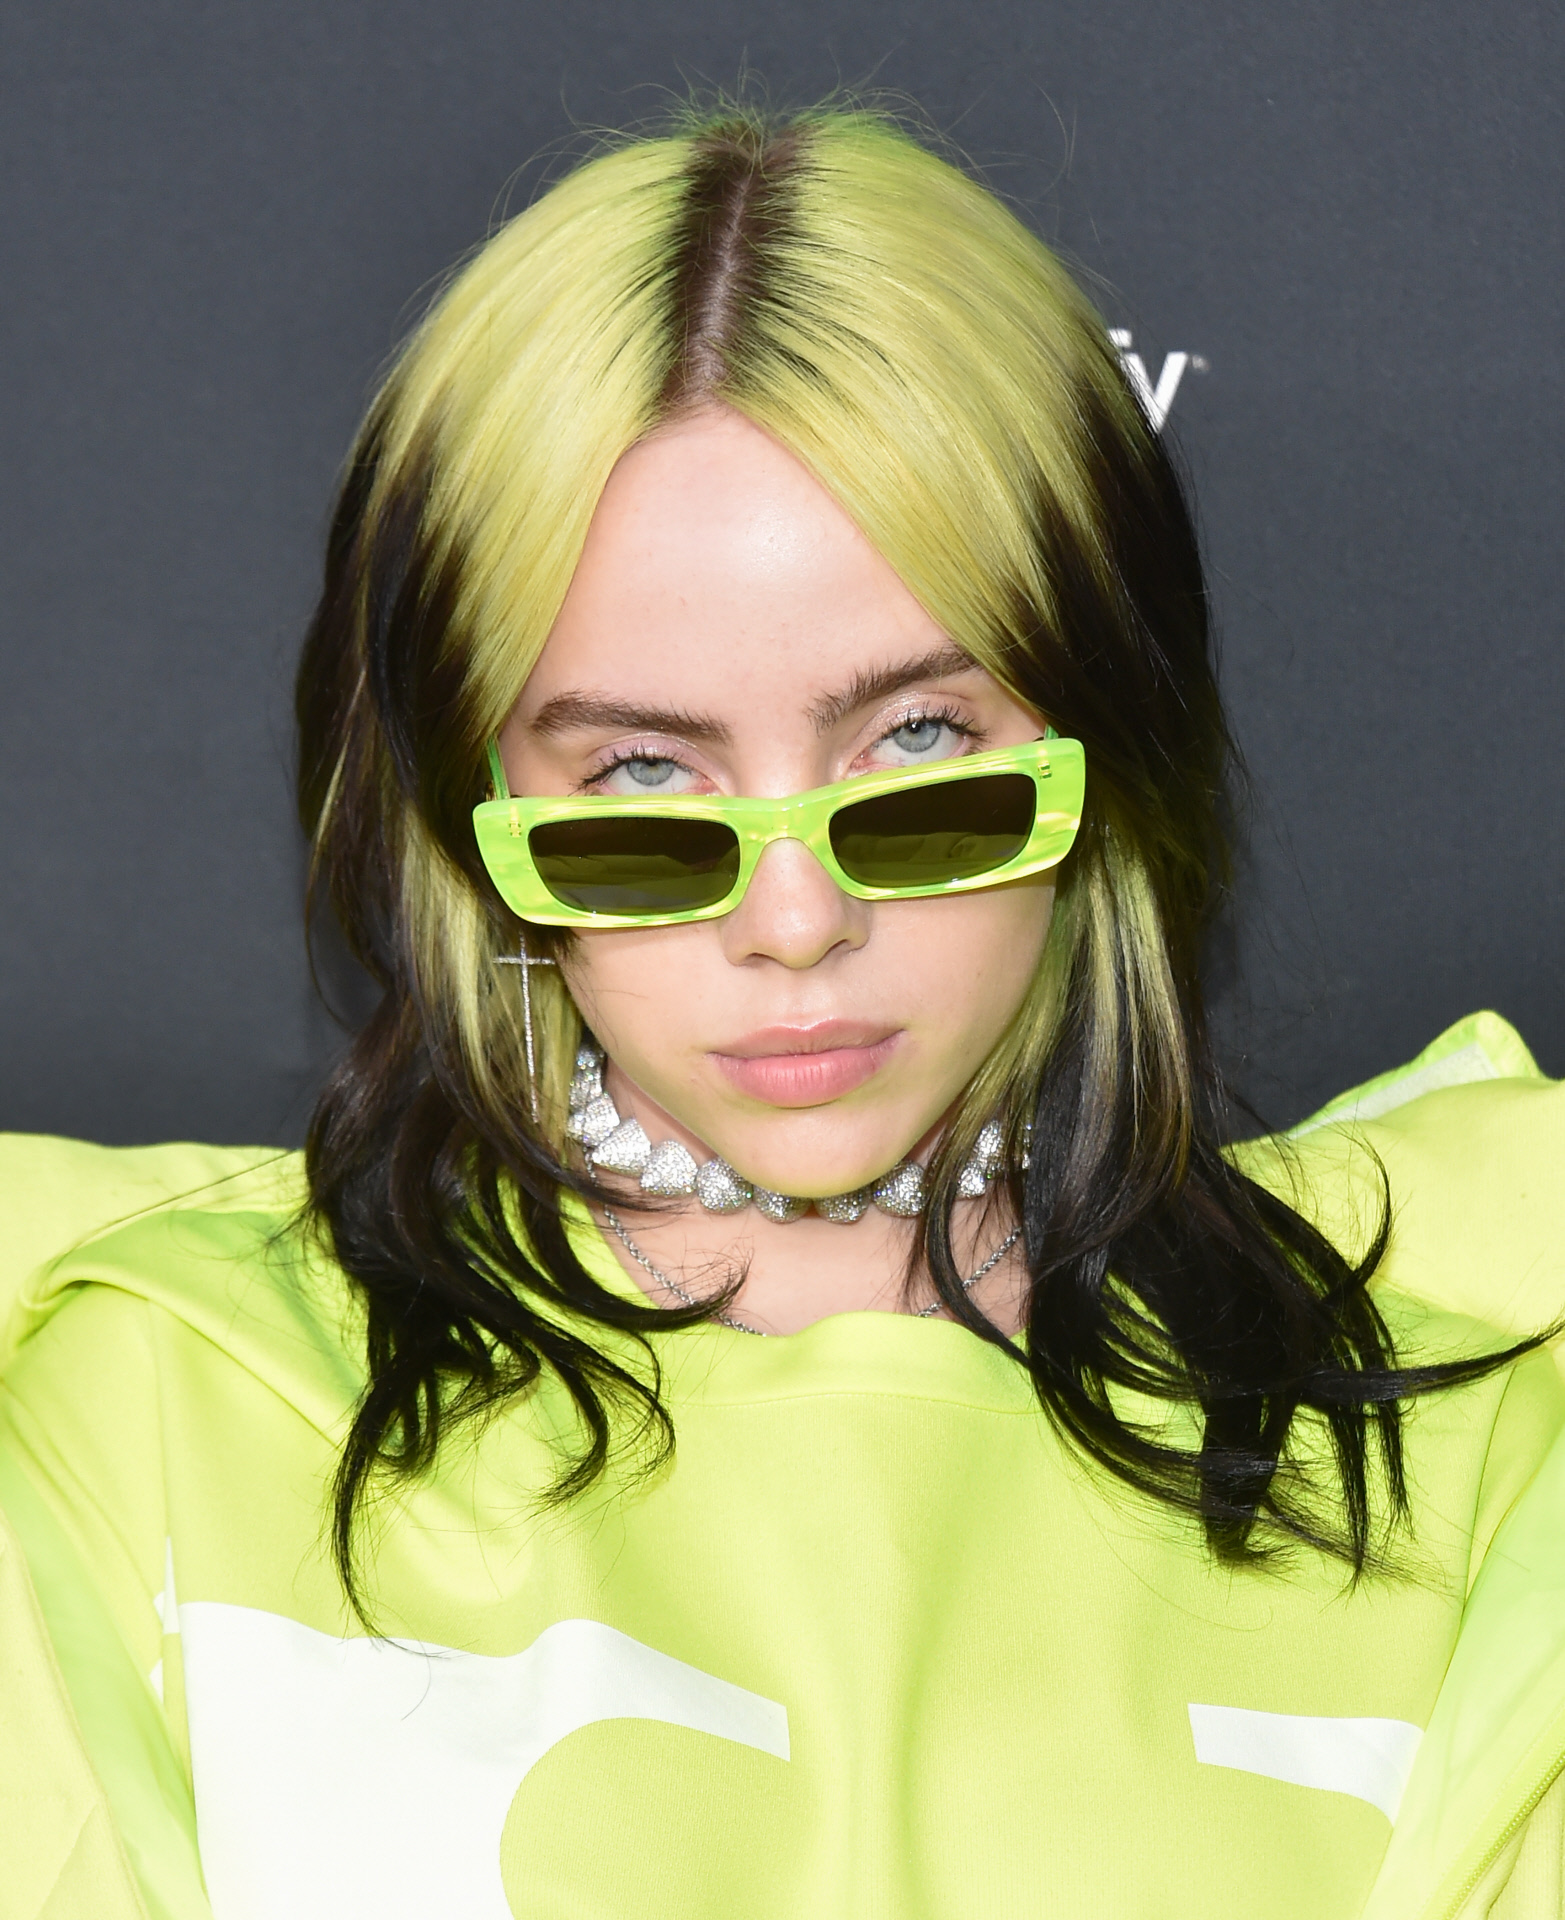 Billie Eilish wore the 'colored roots' like nobody else